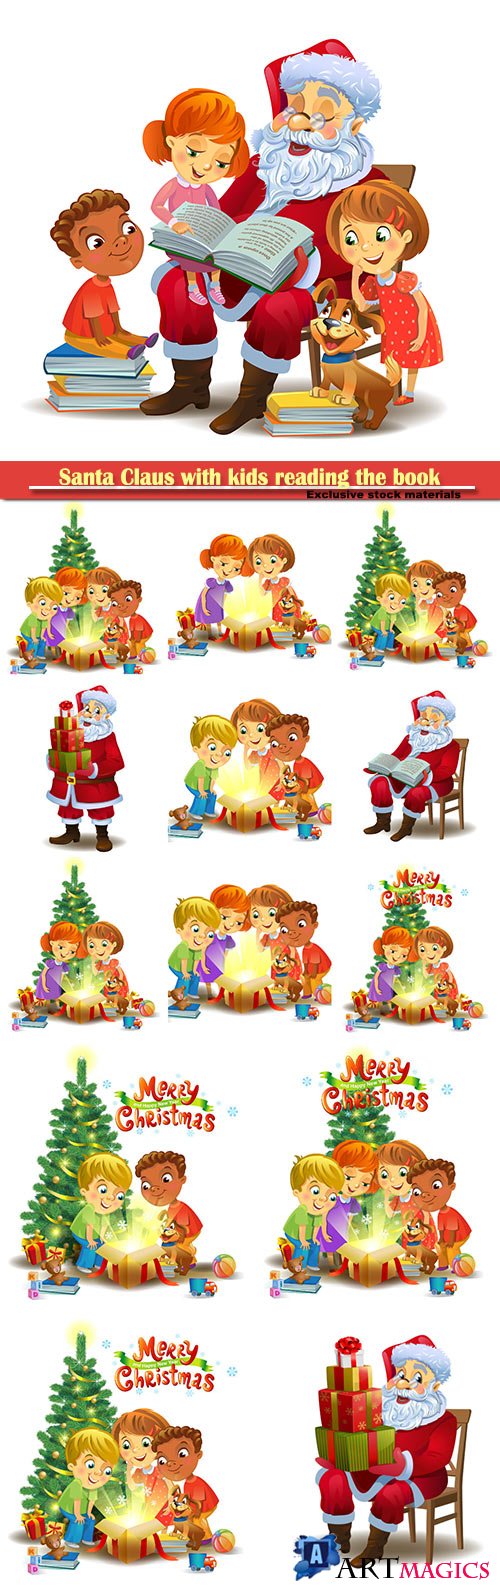 Santa Claus with kids reading the book vector illustration